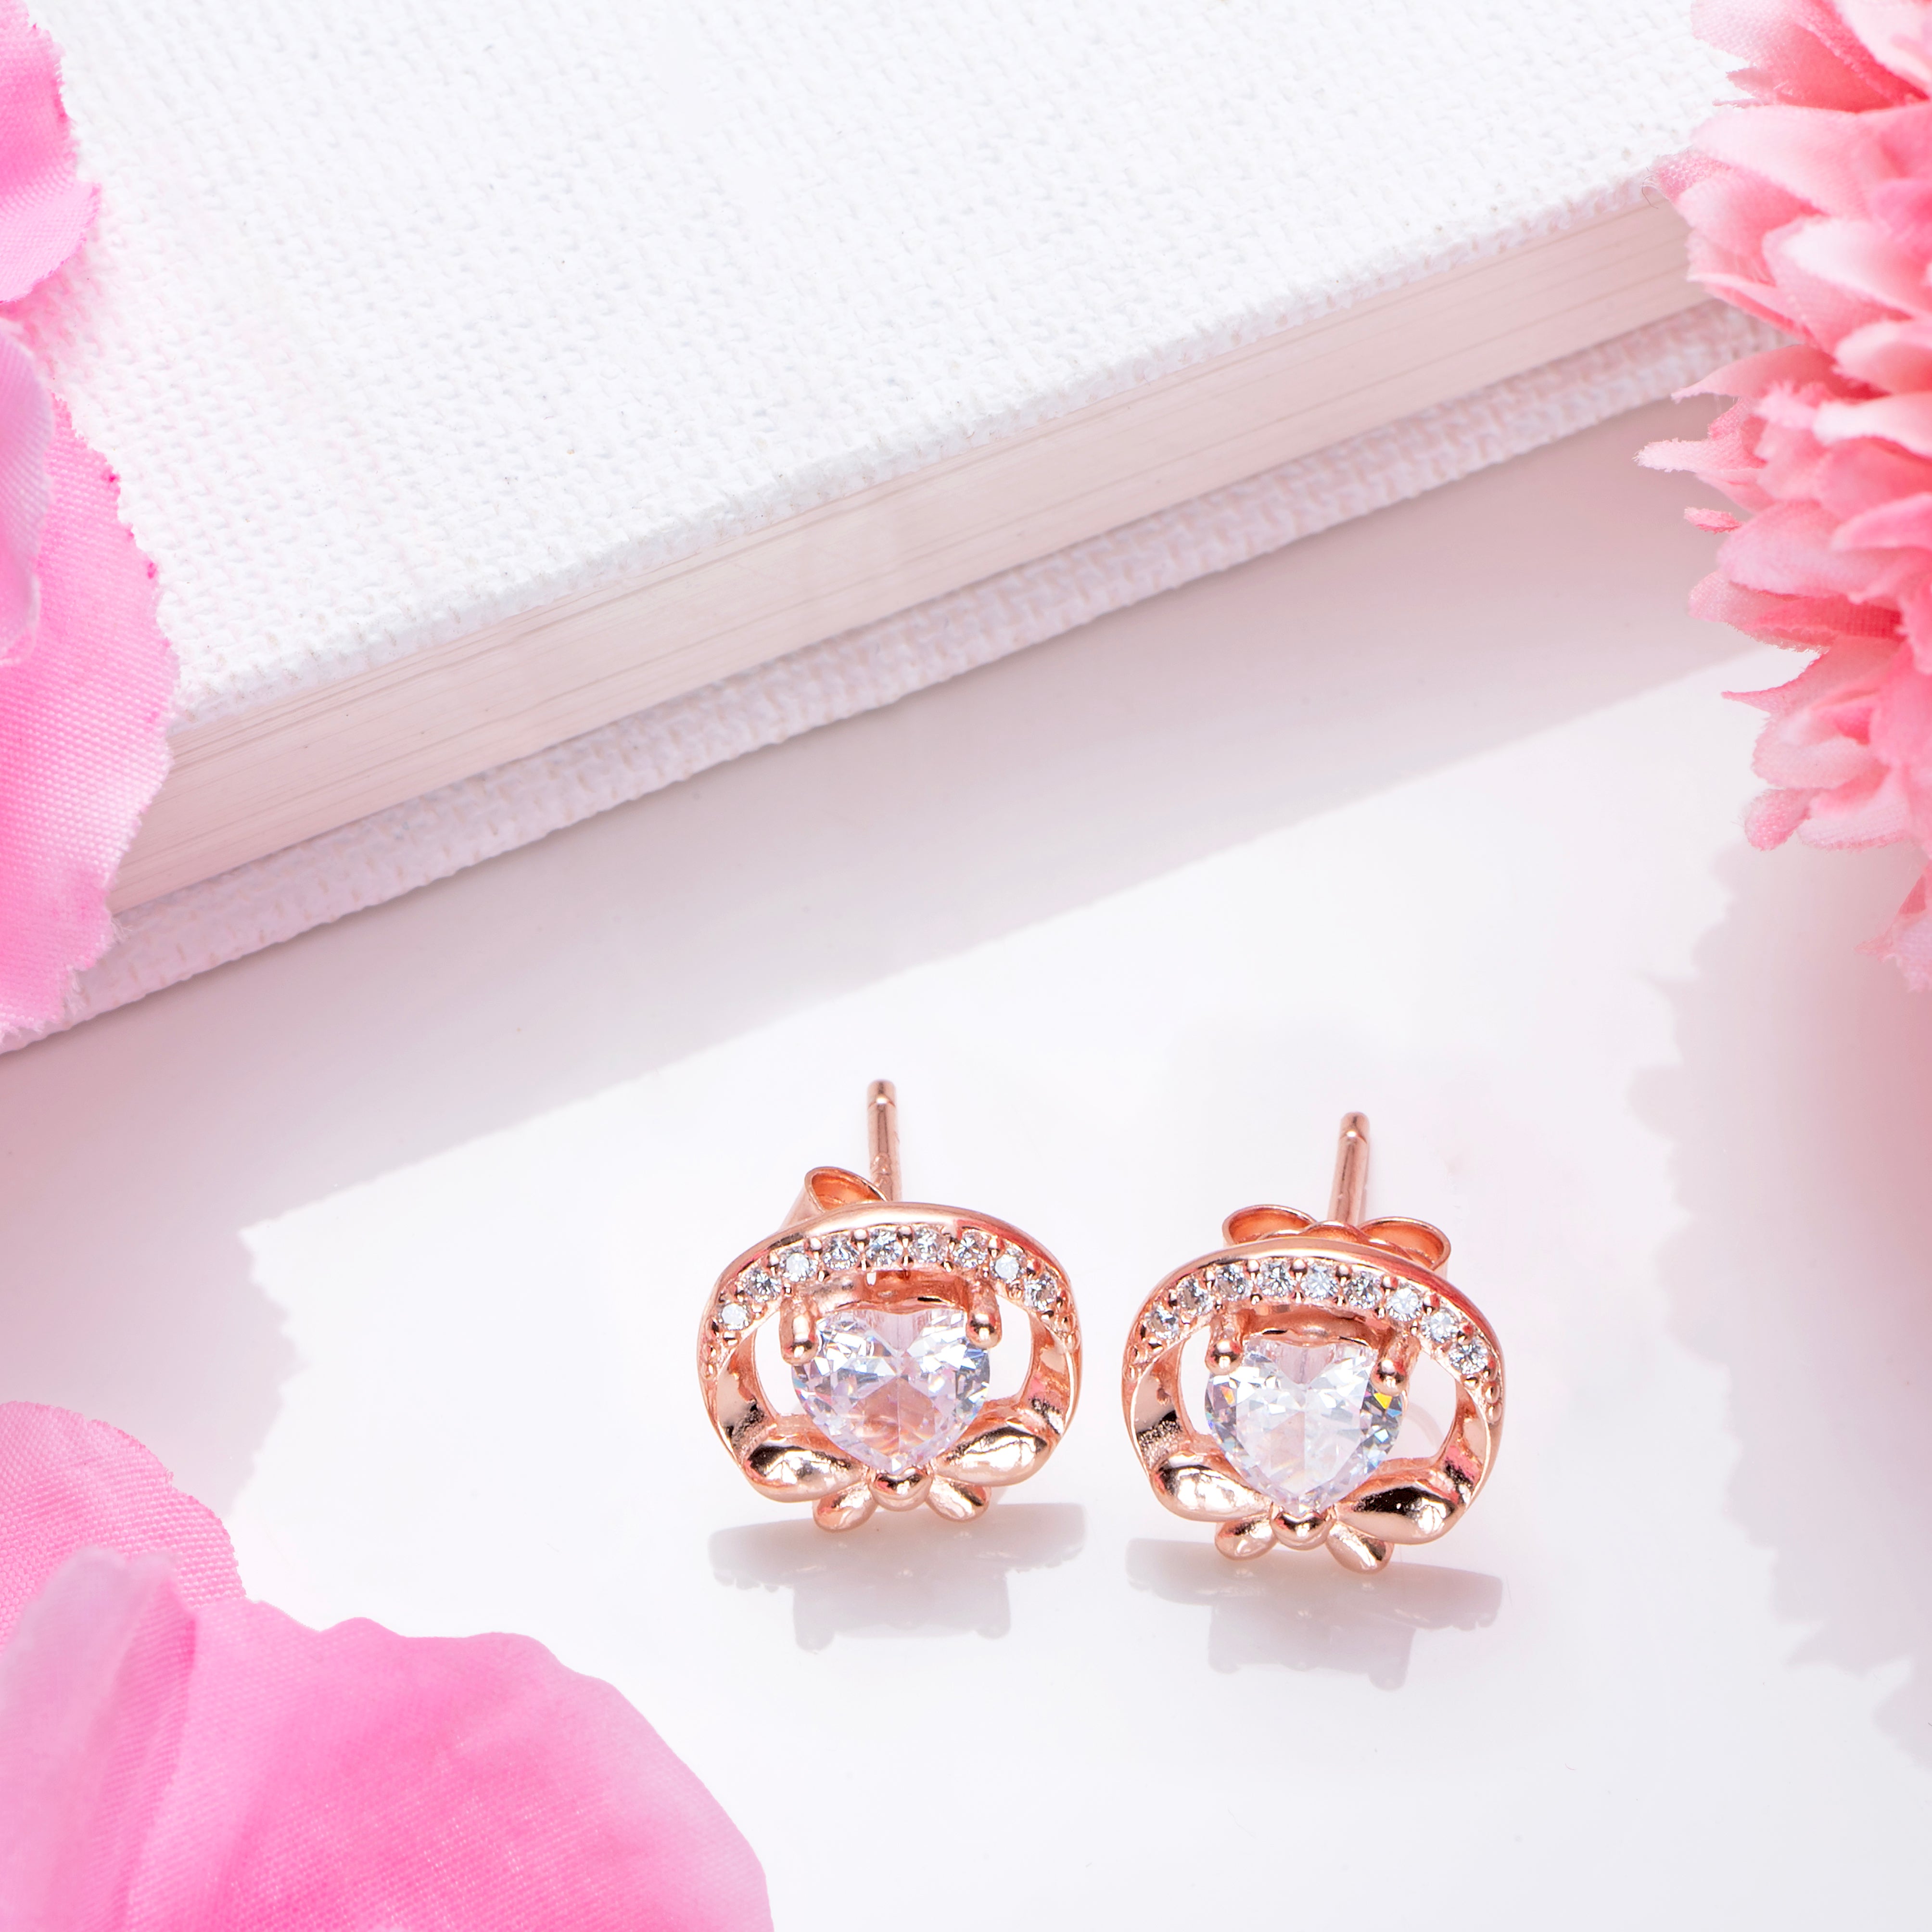 Romantic Rose Gold Plated 925 Sterling Silver Heart Earrings